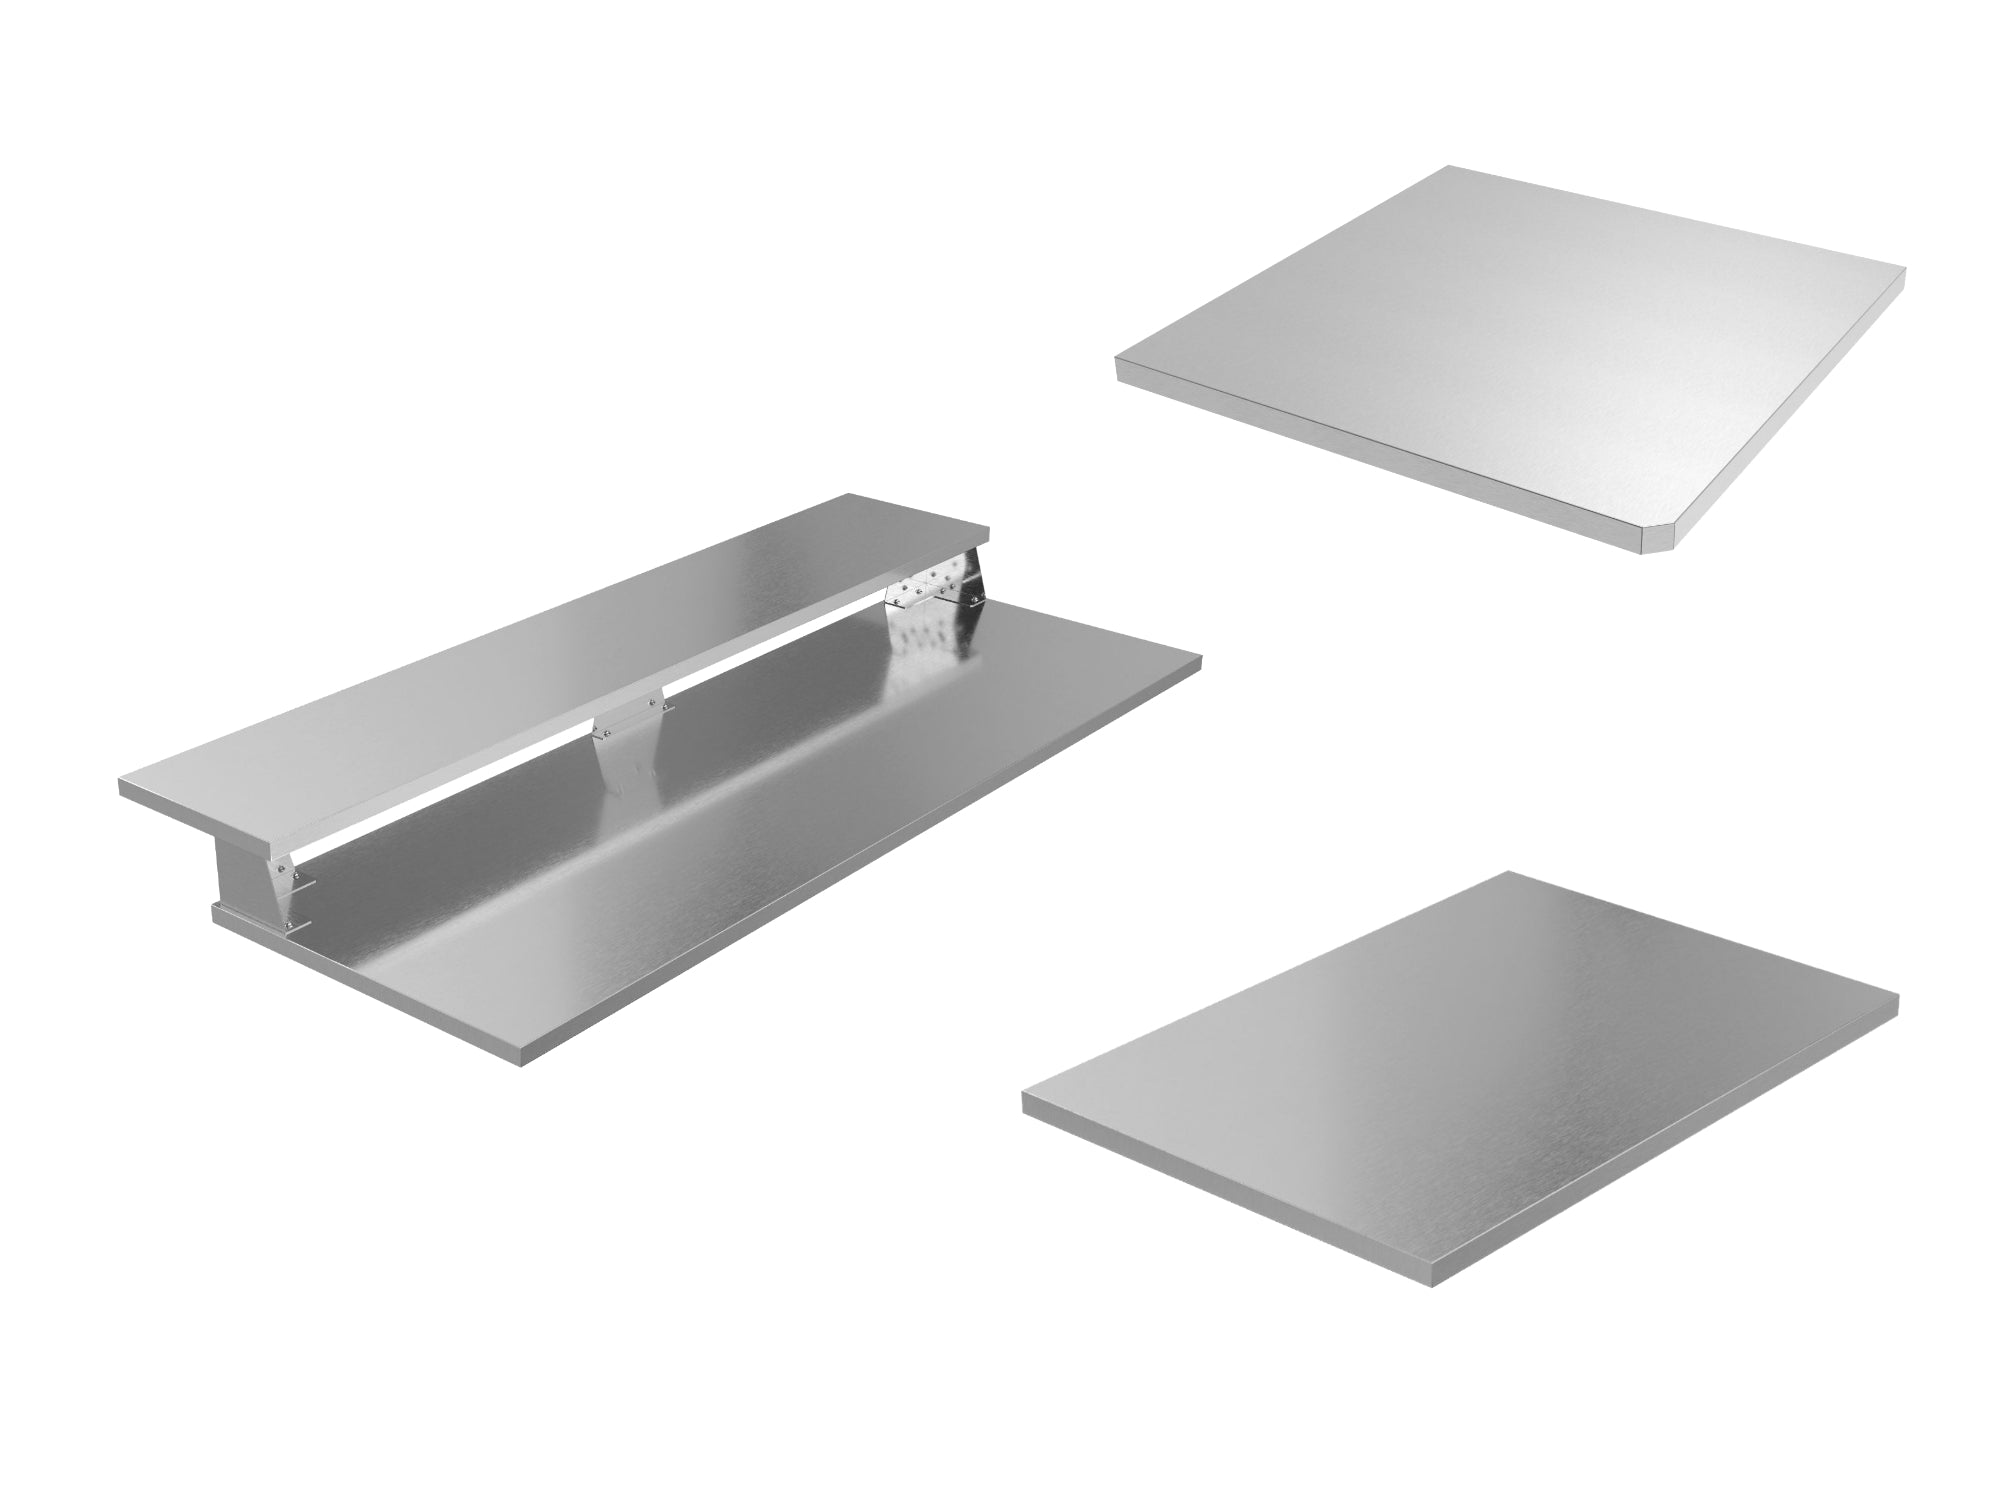 Signature Outdoor Kitchen Cabinet Stainless Steel Countertop Bundle: 36 in., 90 Degree Corner Countertop, 72 in. 2 Side Extended with shelf, Bar Bracket